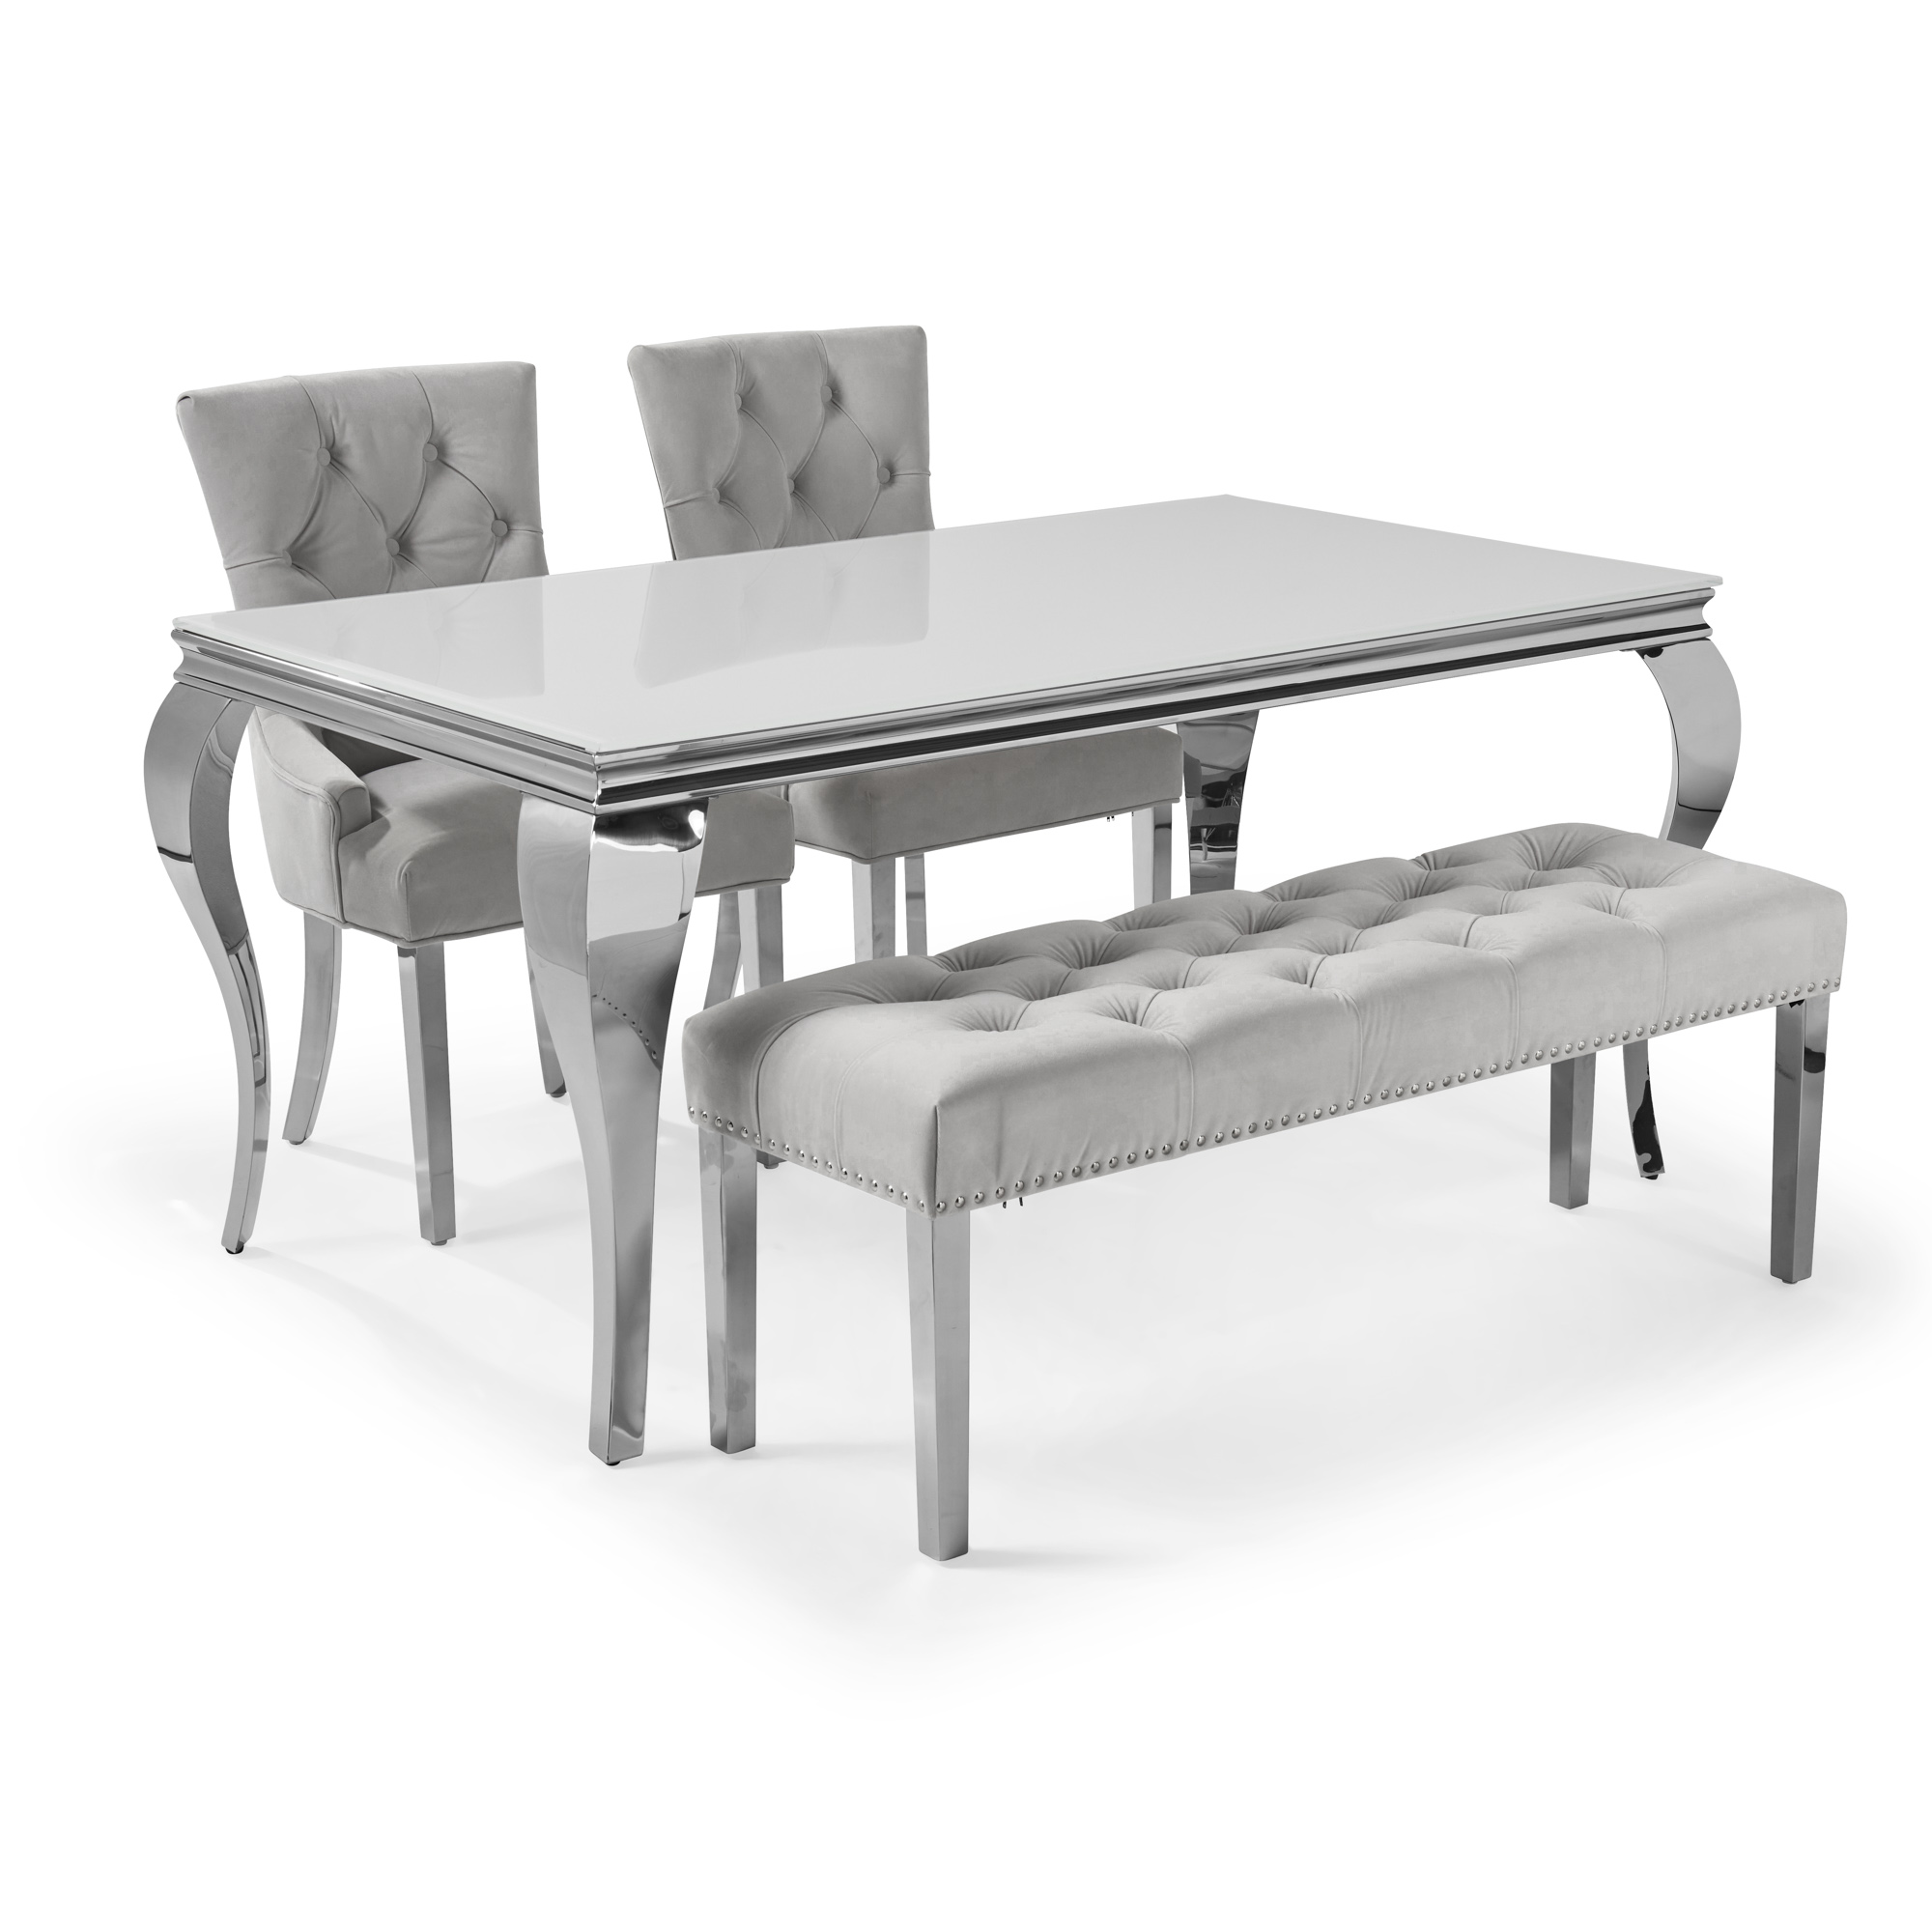 1.6m Louis Polished Steel Dining White Glass Table Set with 2 Truro Dining Chairs and Bench in Light Grey